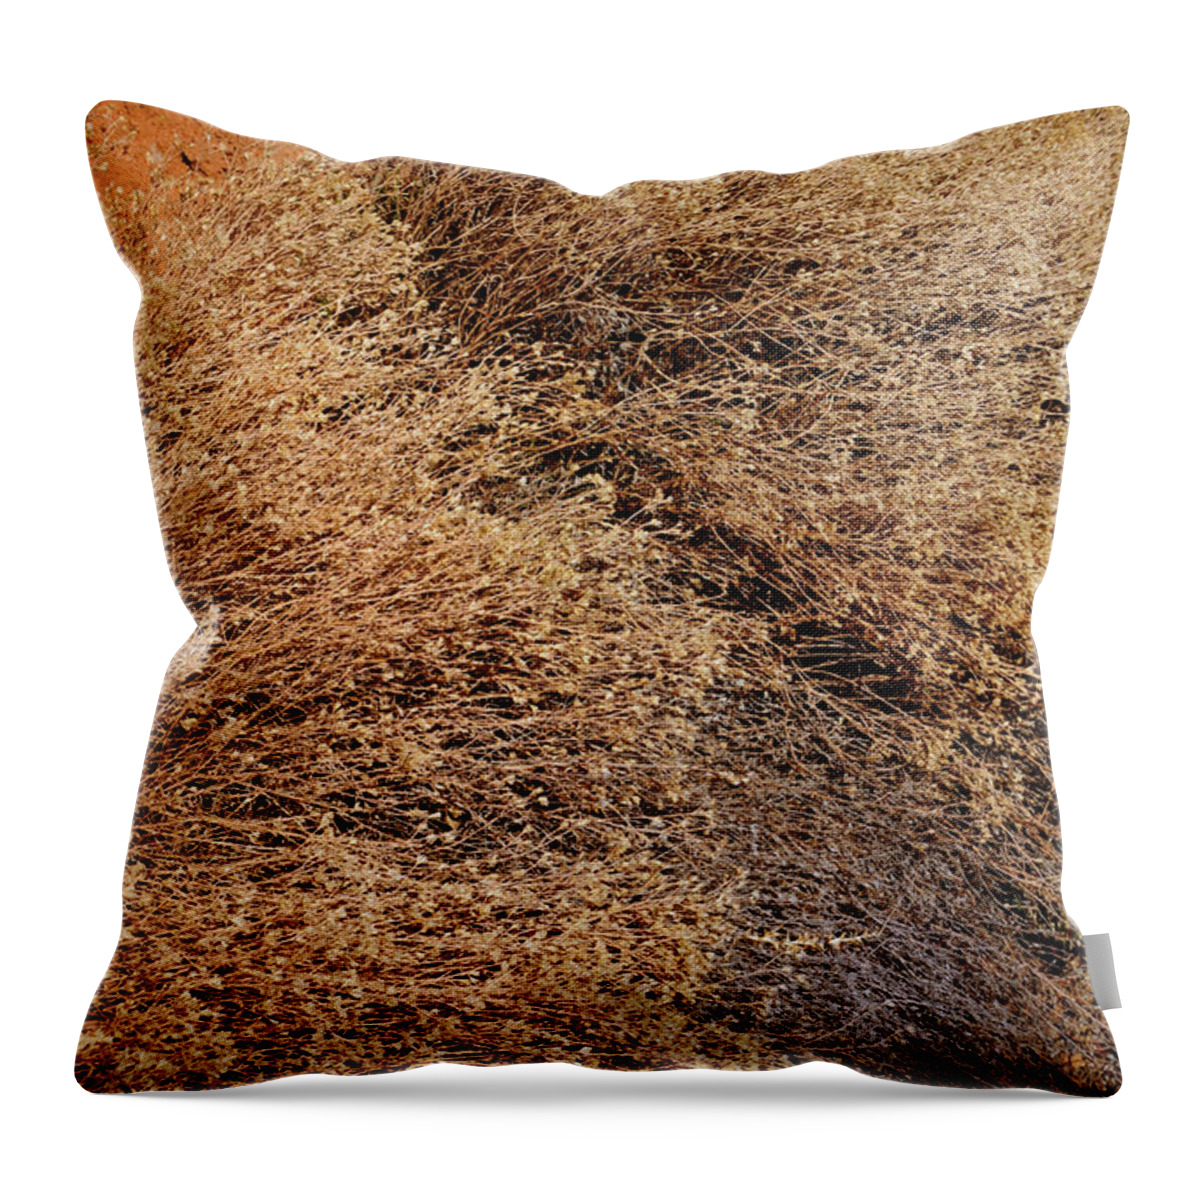 Landscape Throw Pillow featuring the photograph Coyote Brush by Ron Cline